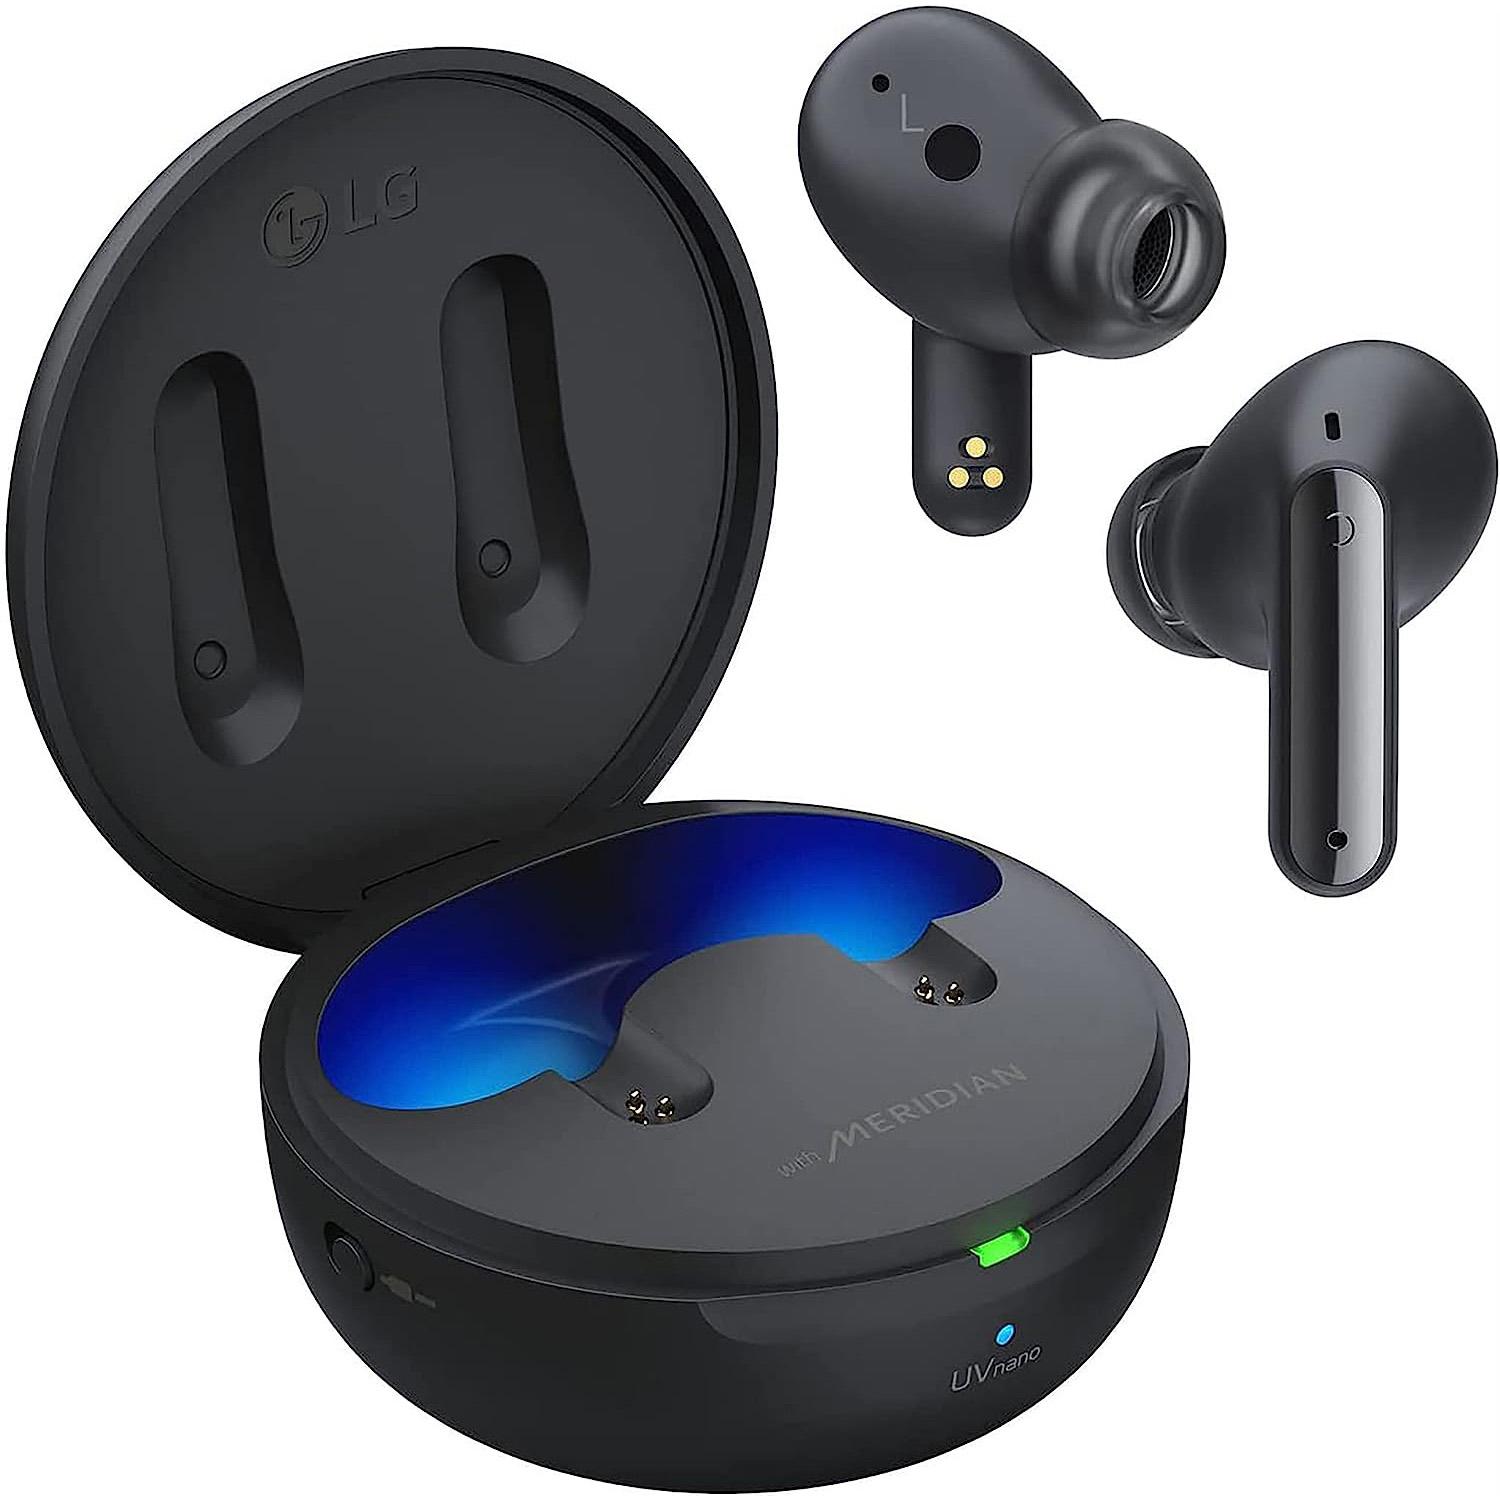 LG TONE FP9 Noise Cancellation True Wireless Bluetooth Earbuds for $49.99 Shipped